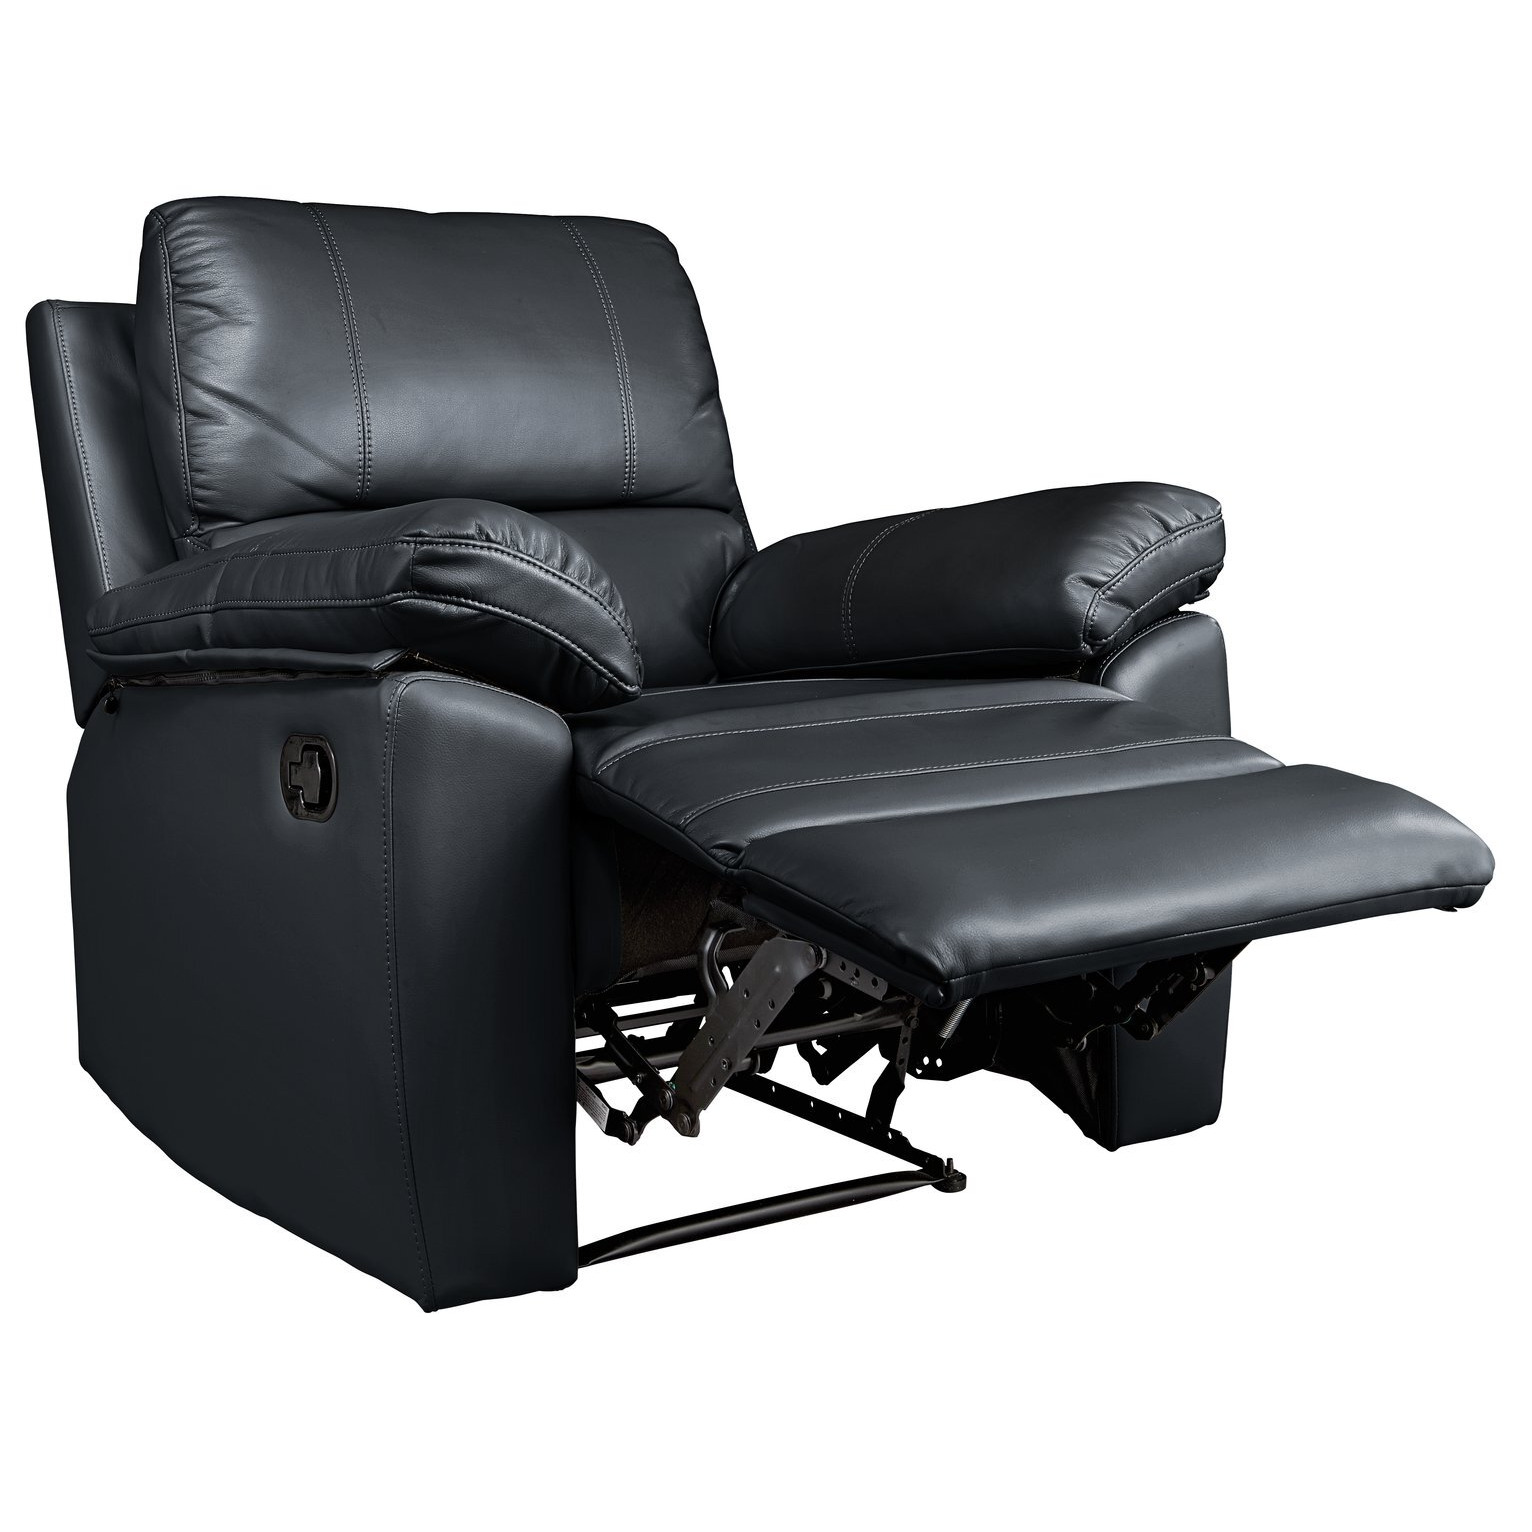 Argos Home Toby Faux Leather Manual Recliner Chair - Black - image 1